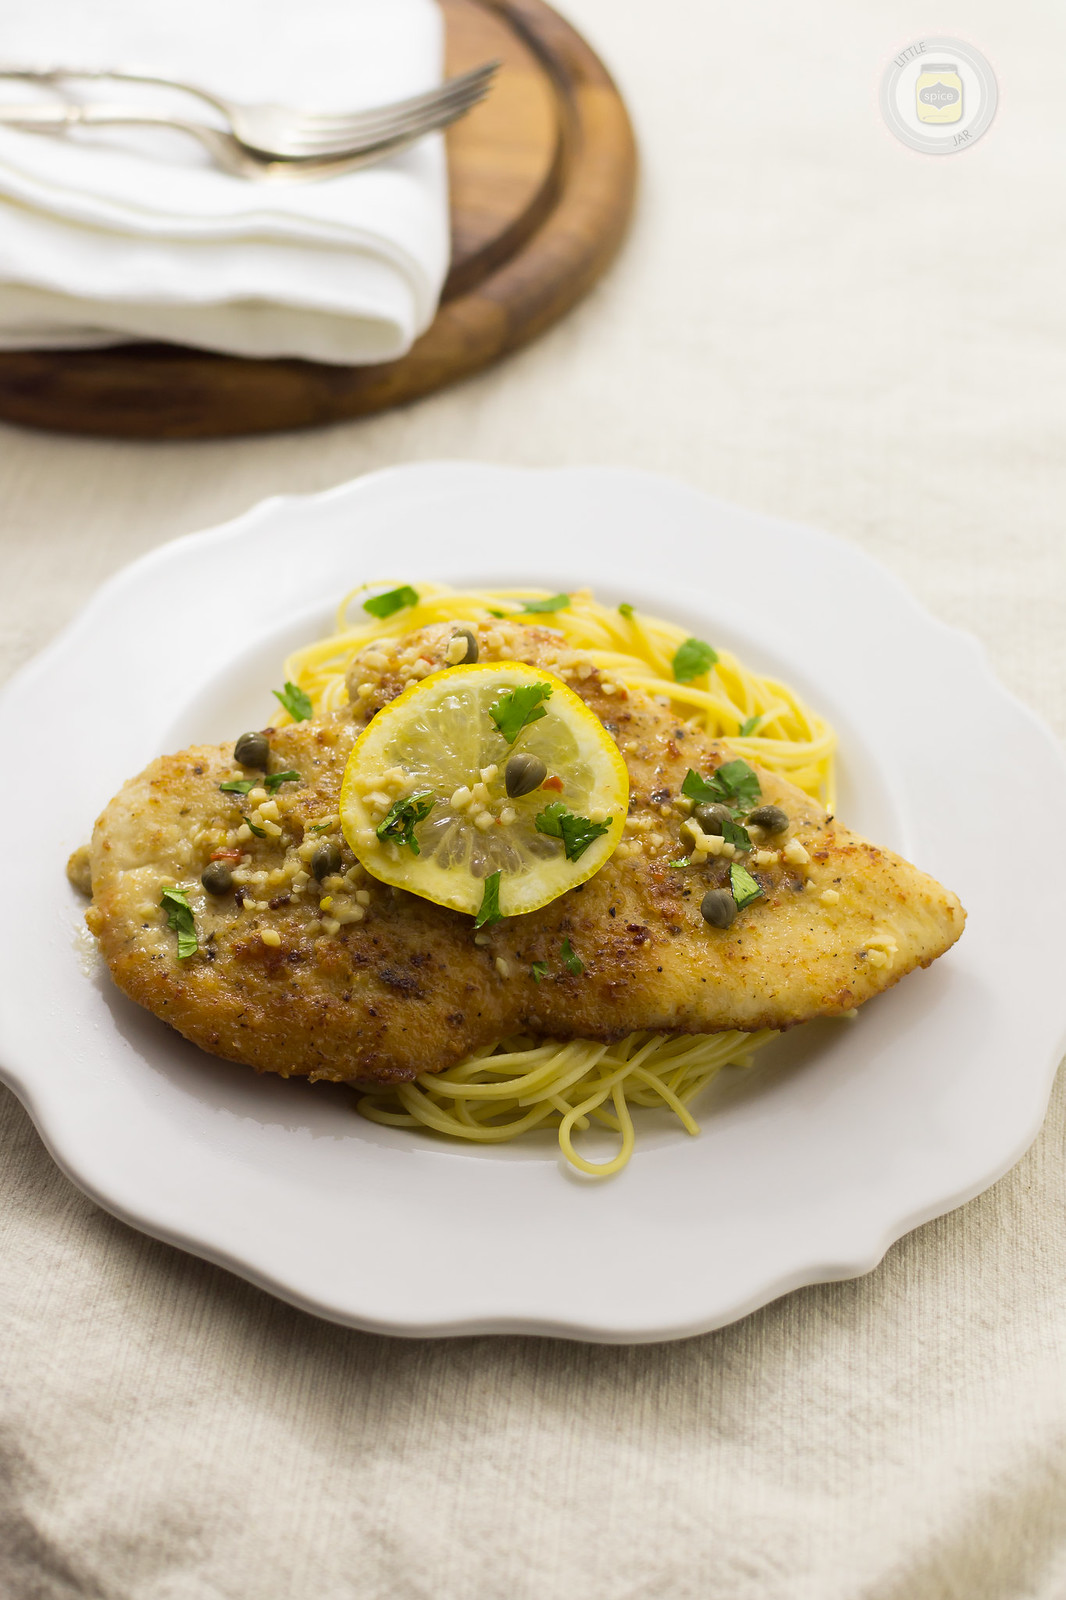 prepared spaghetti and seared chicken with lemon slice and parsley on top on white surface